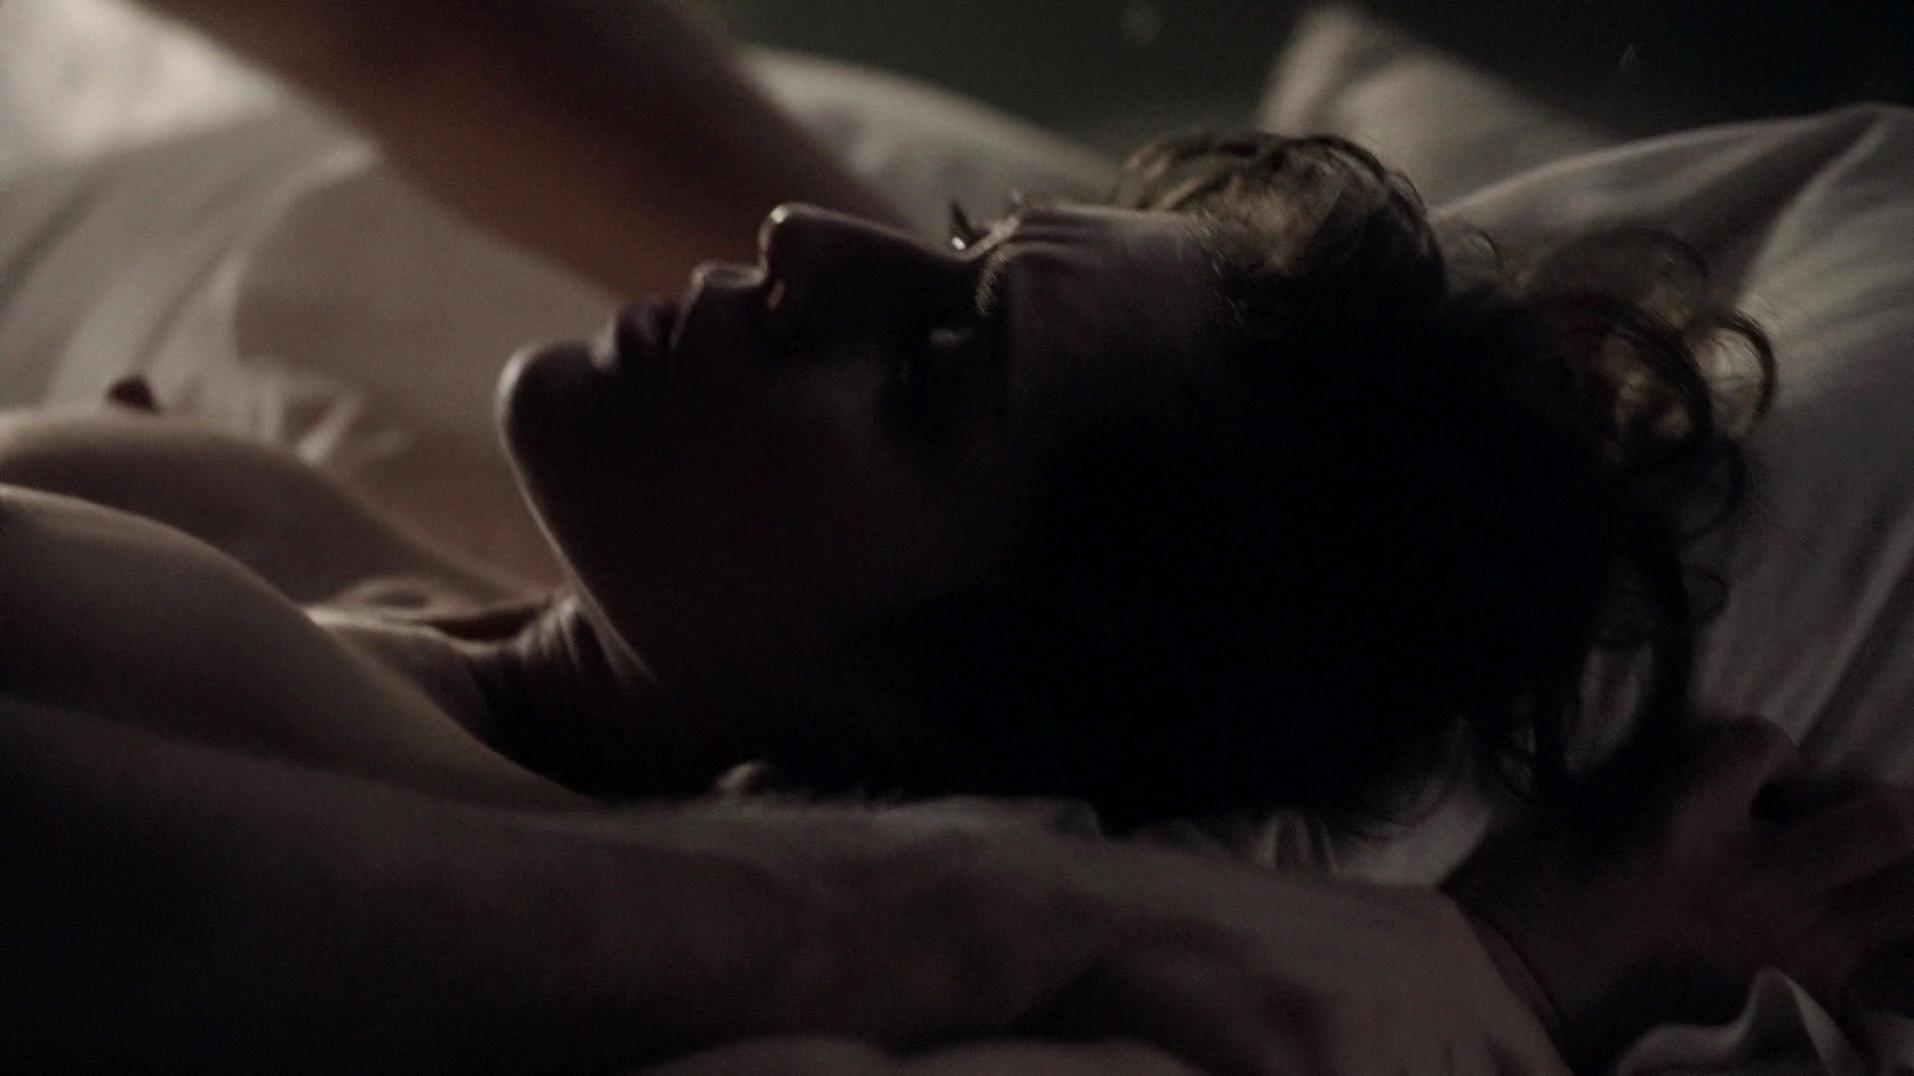 Lizzy Caplan nude, Allison Janney nude - Masters of Sex s02e01 (2014)